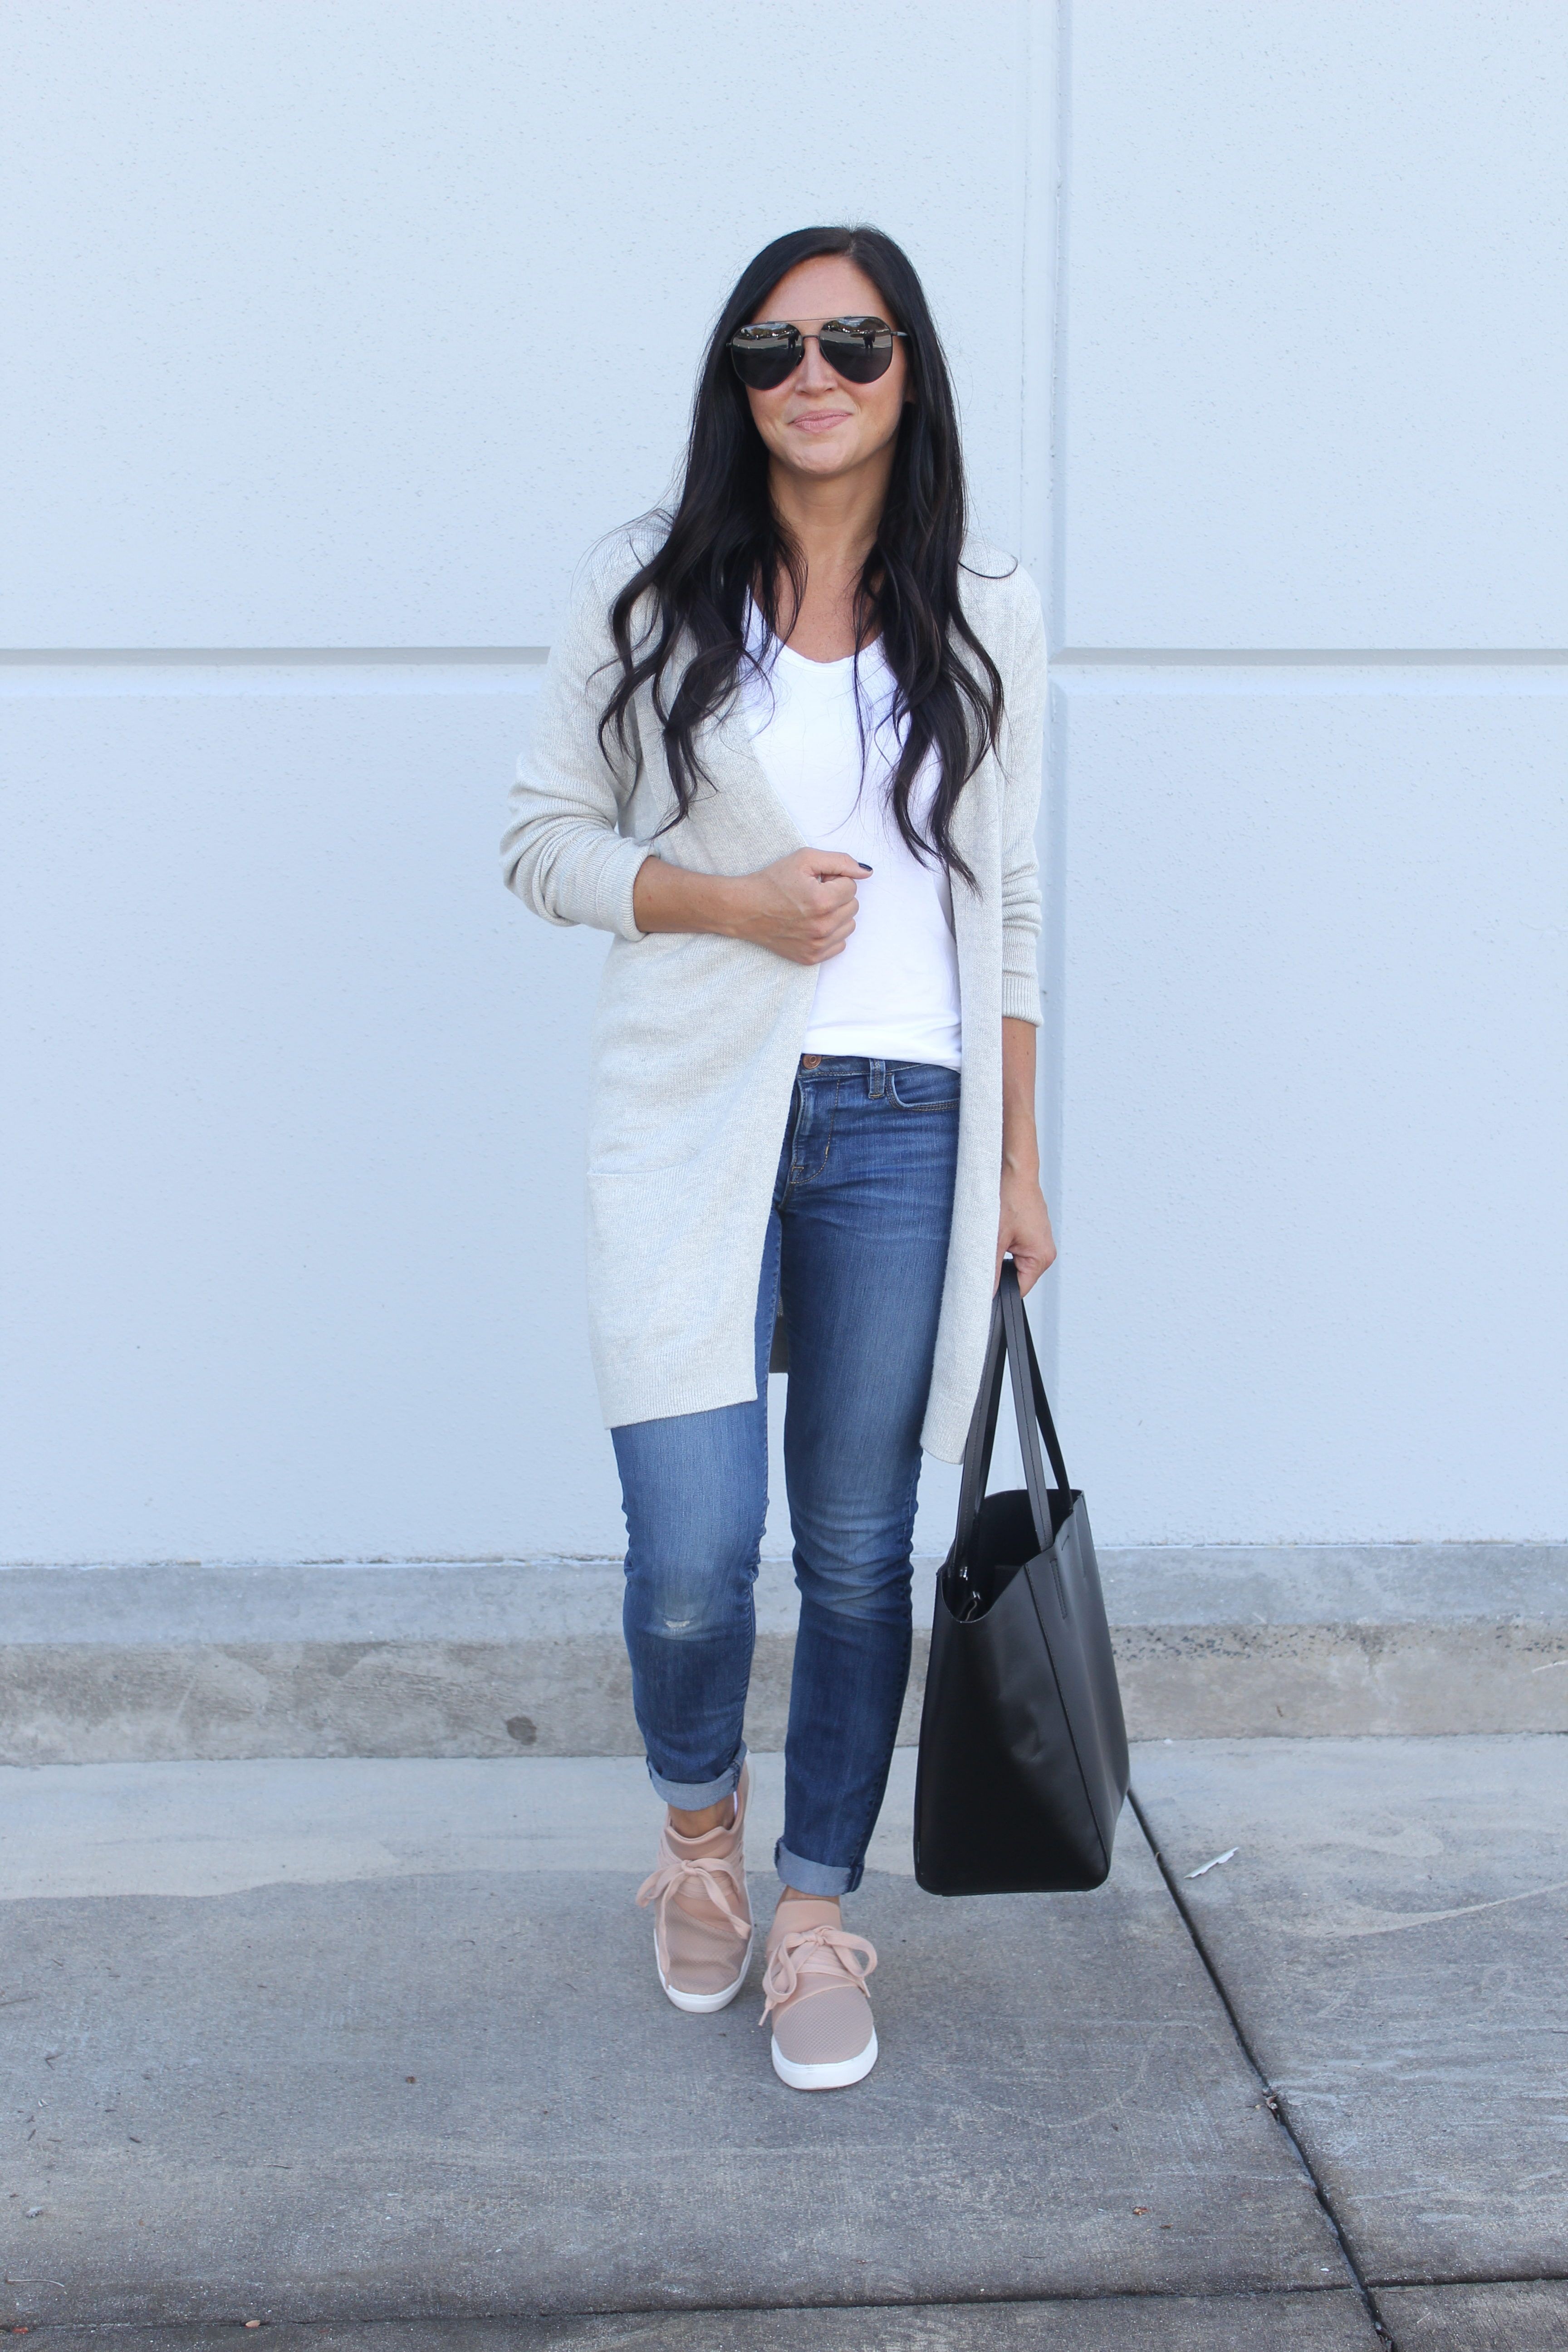 A Cardigan, Jeans, & Sneakers